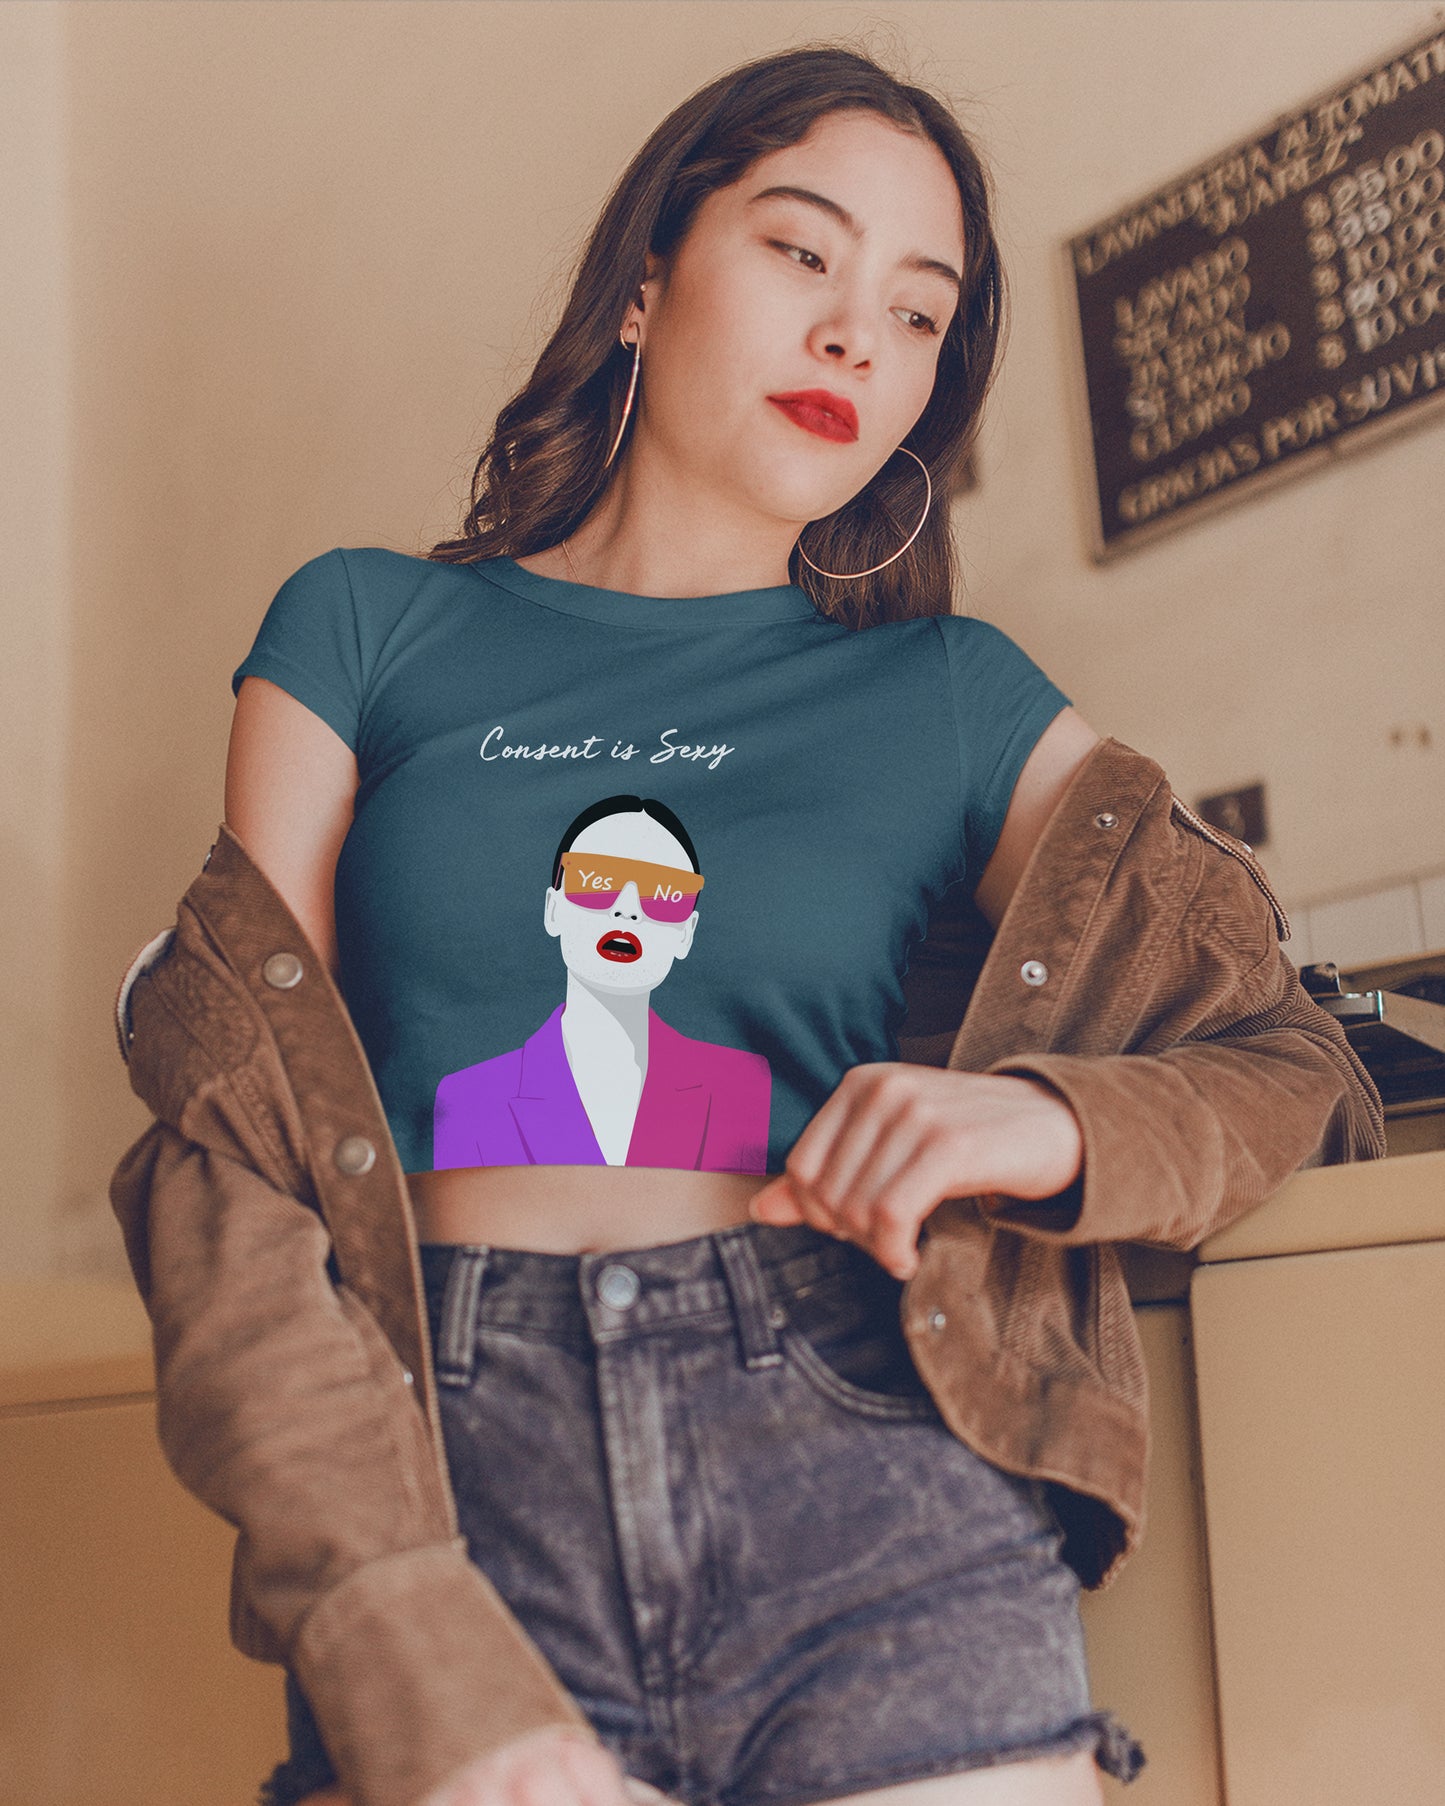 Consent is sexy navy blue printed crop t shirt for women - Muselot